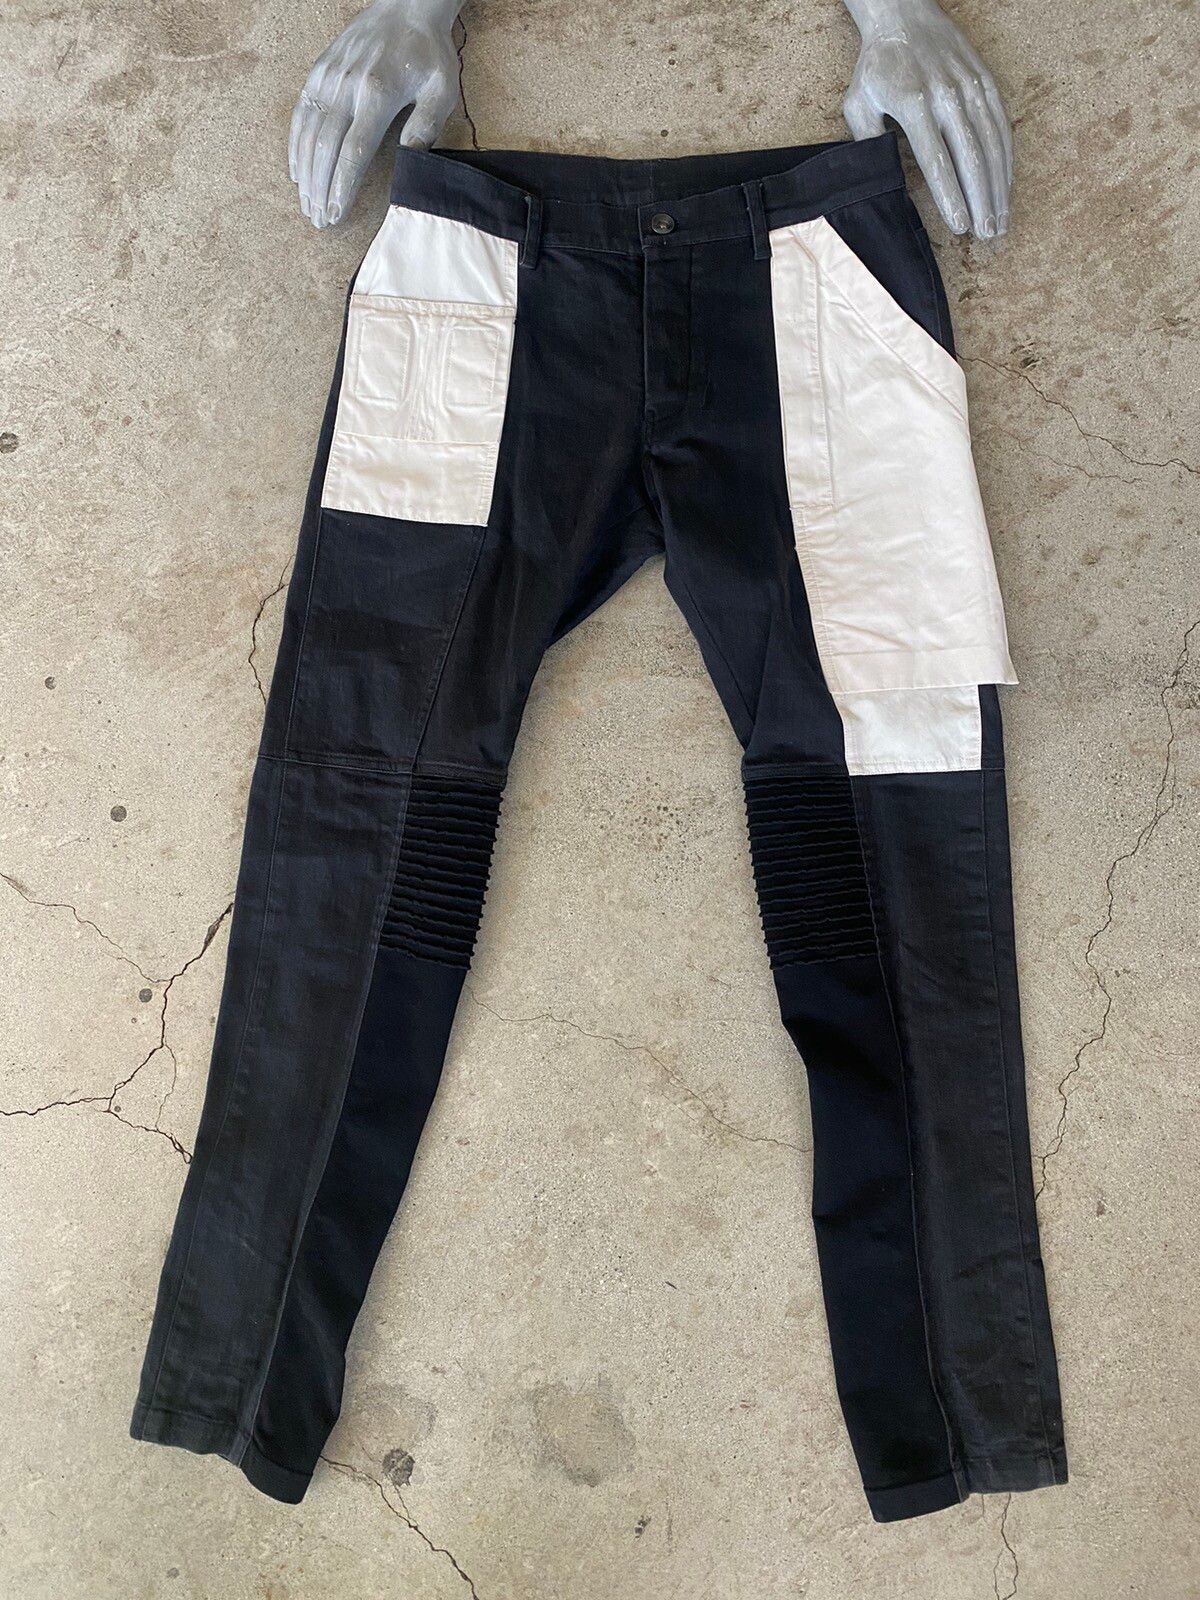 Rick Owens ARCHIVE RICK OWENS DENIM AND STRETCH PANELED FITTED PANTS |  Grailed